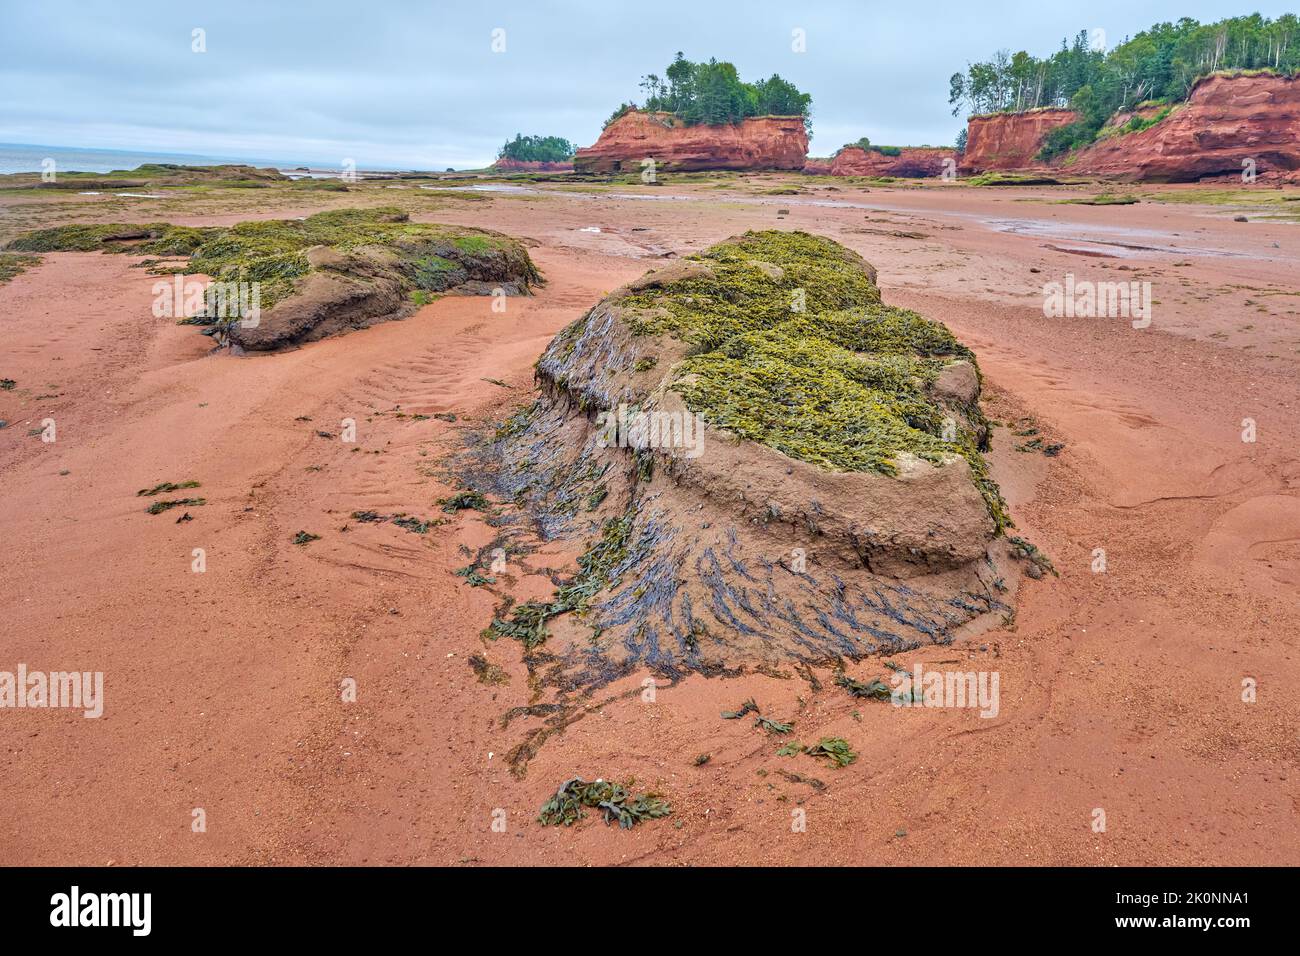 Exposed rock on the floor of the Bay of Fundy in Nova Scotia covered in seaweed at low tide. Stock Photo